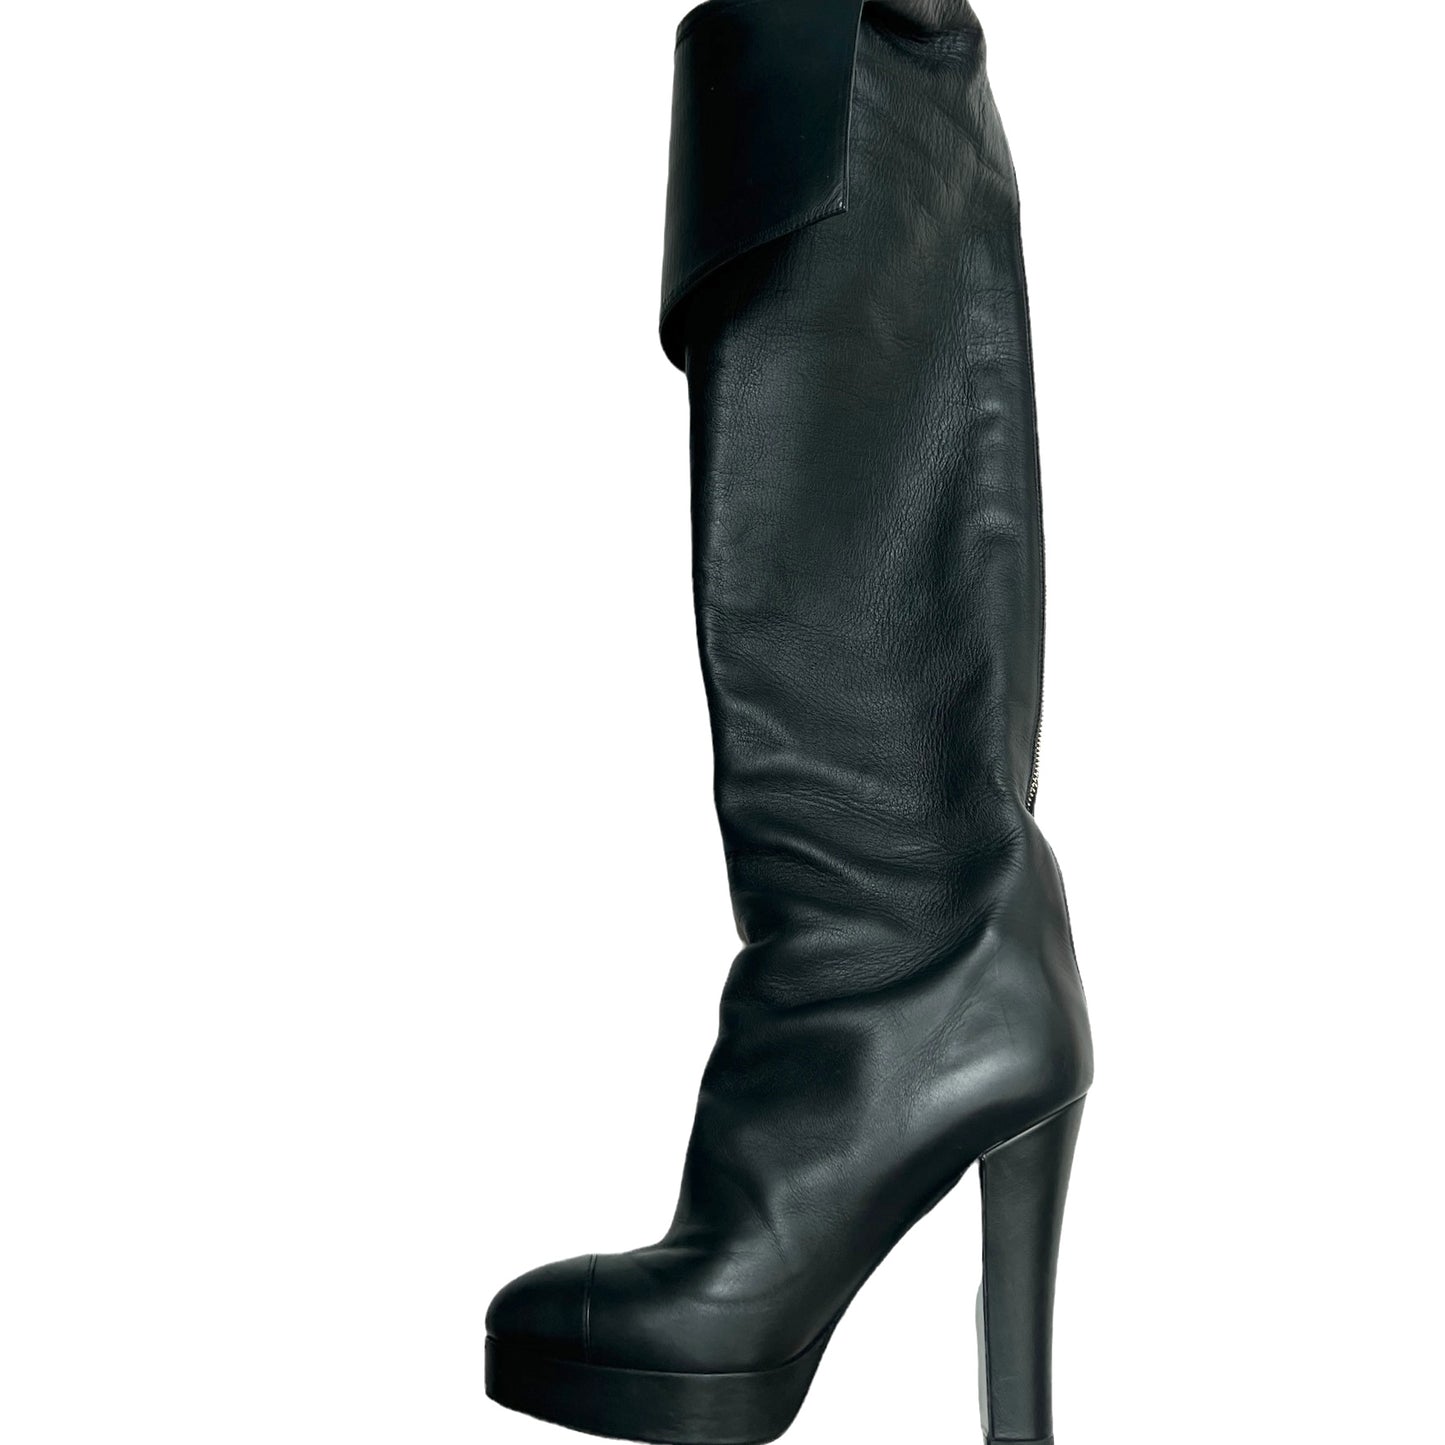 Black Over-The-Knee Boots - 7.5